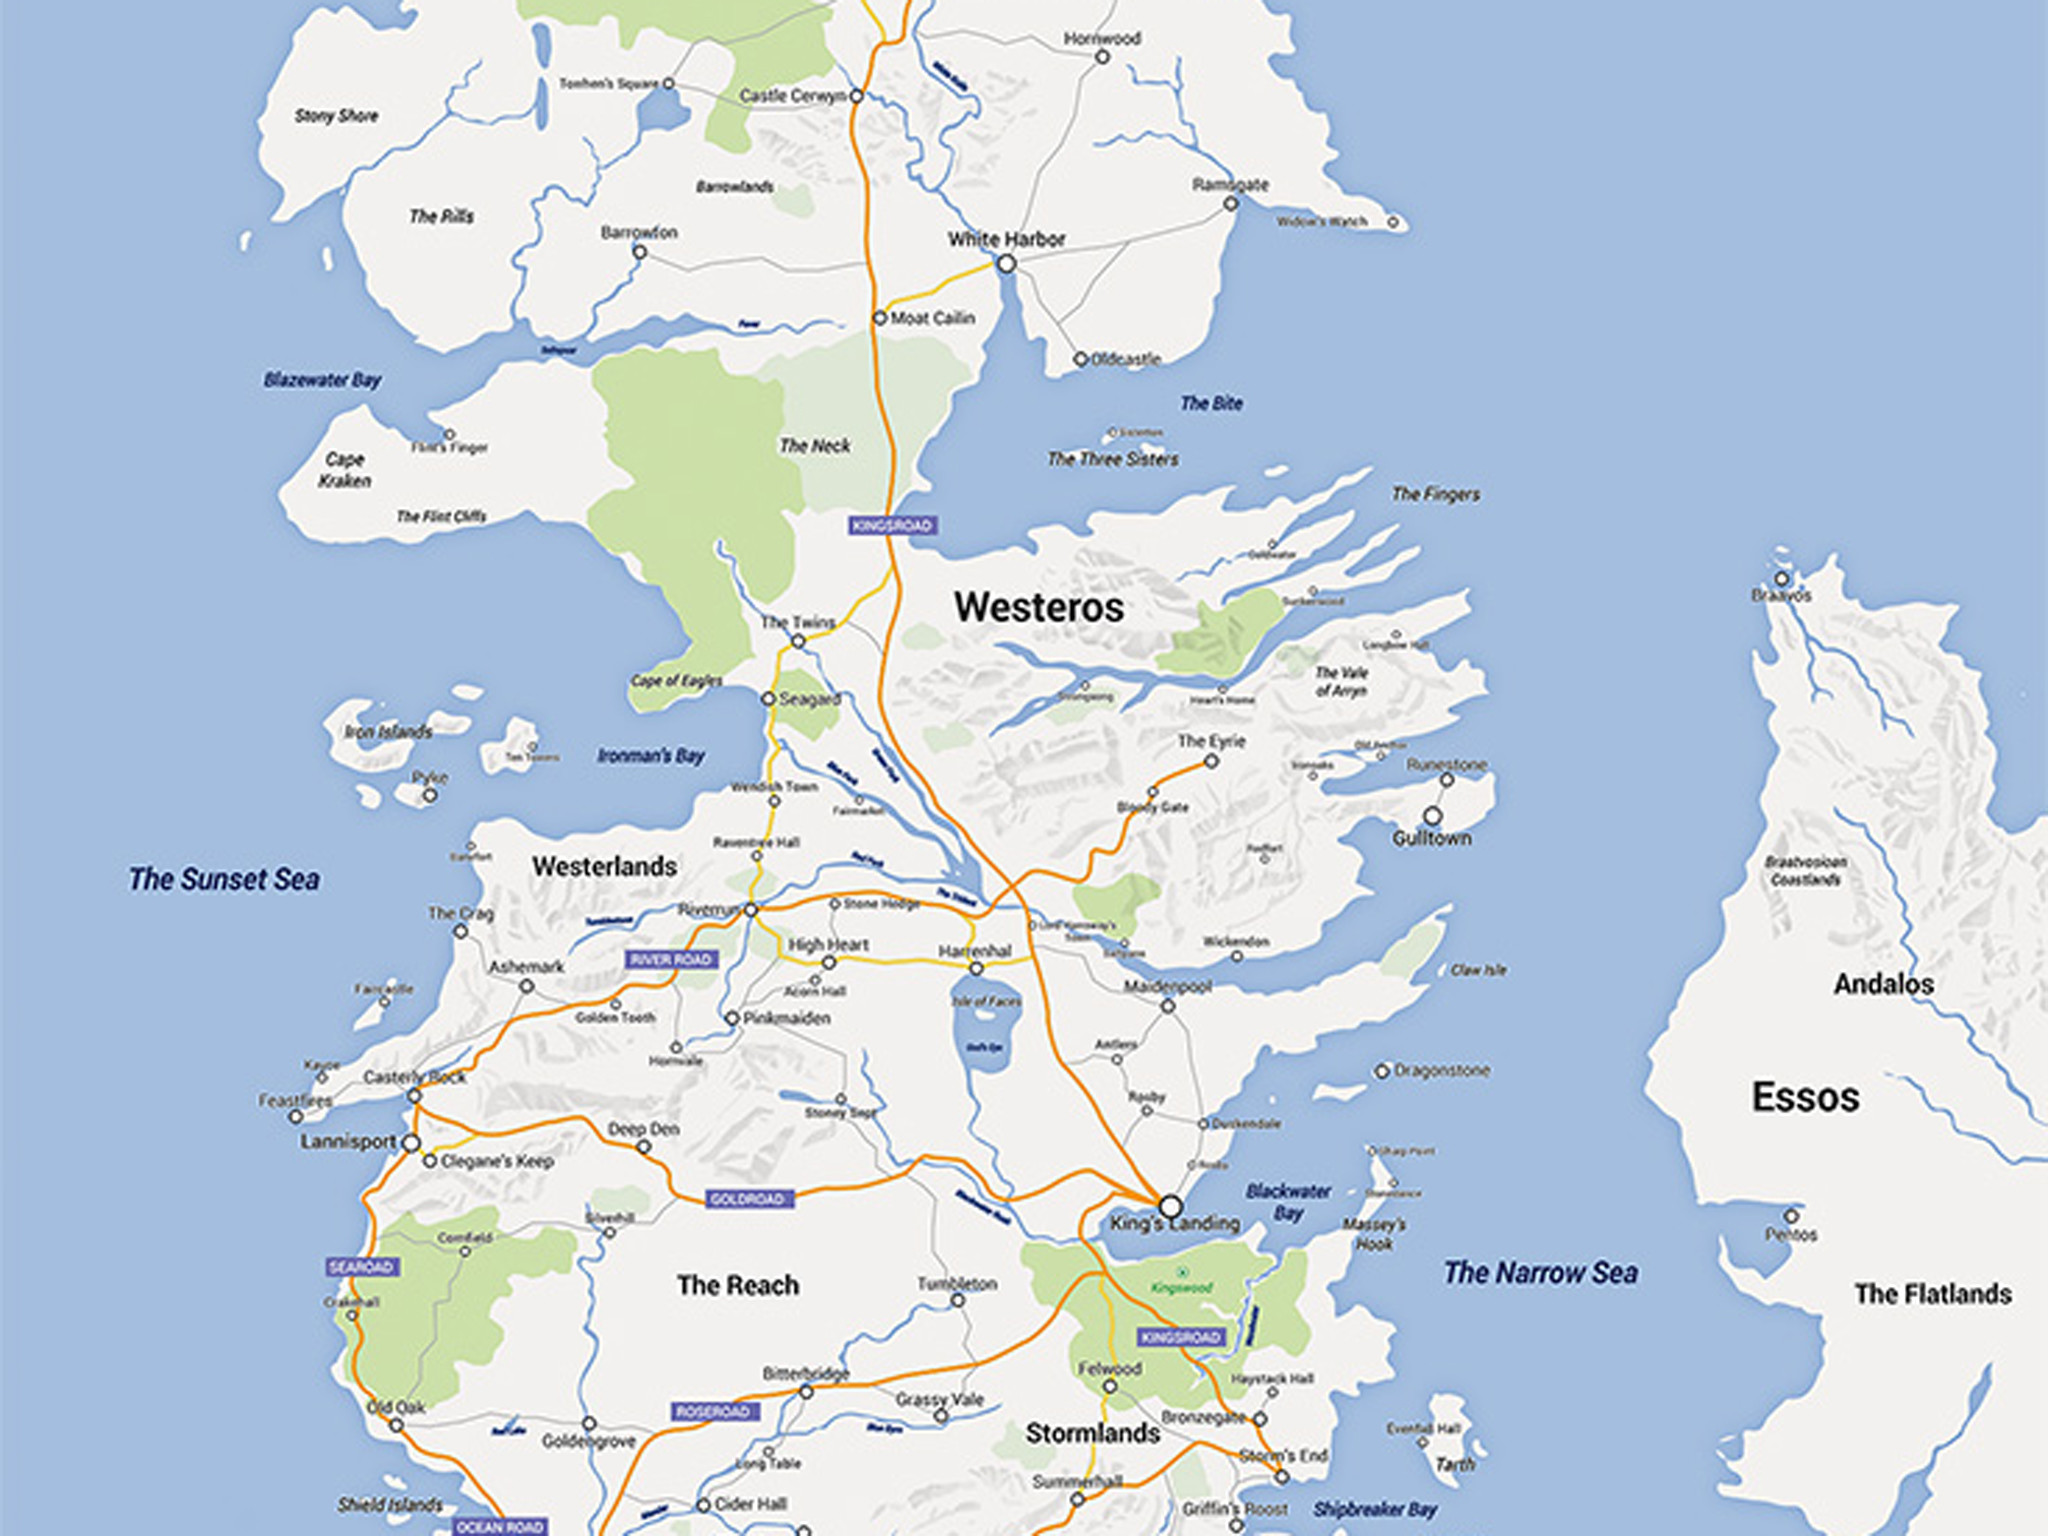 Game of Thrones Westeros remade in Google Maps by Reddit user The Independent